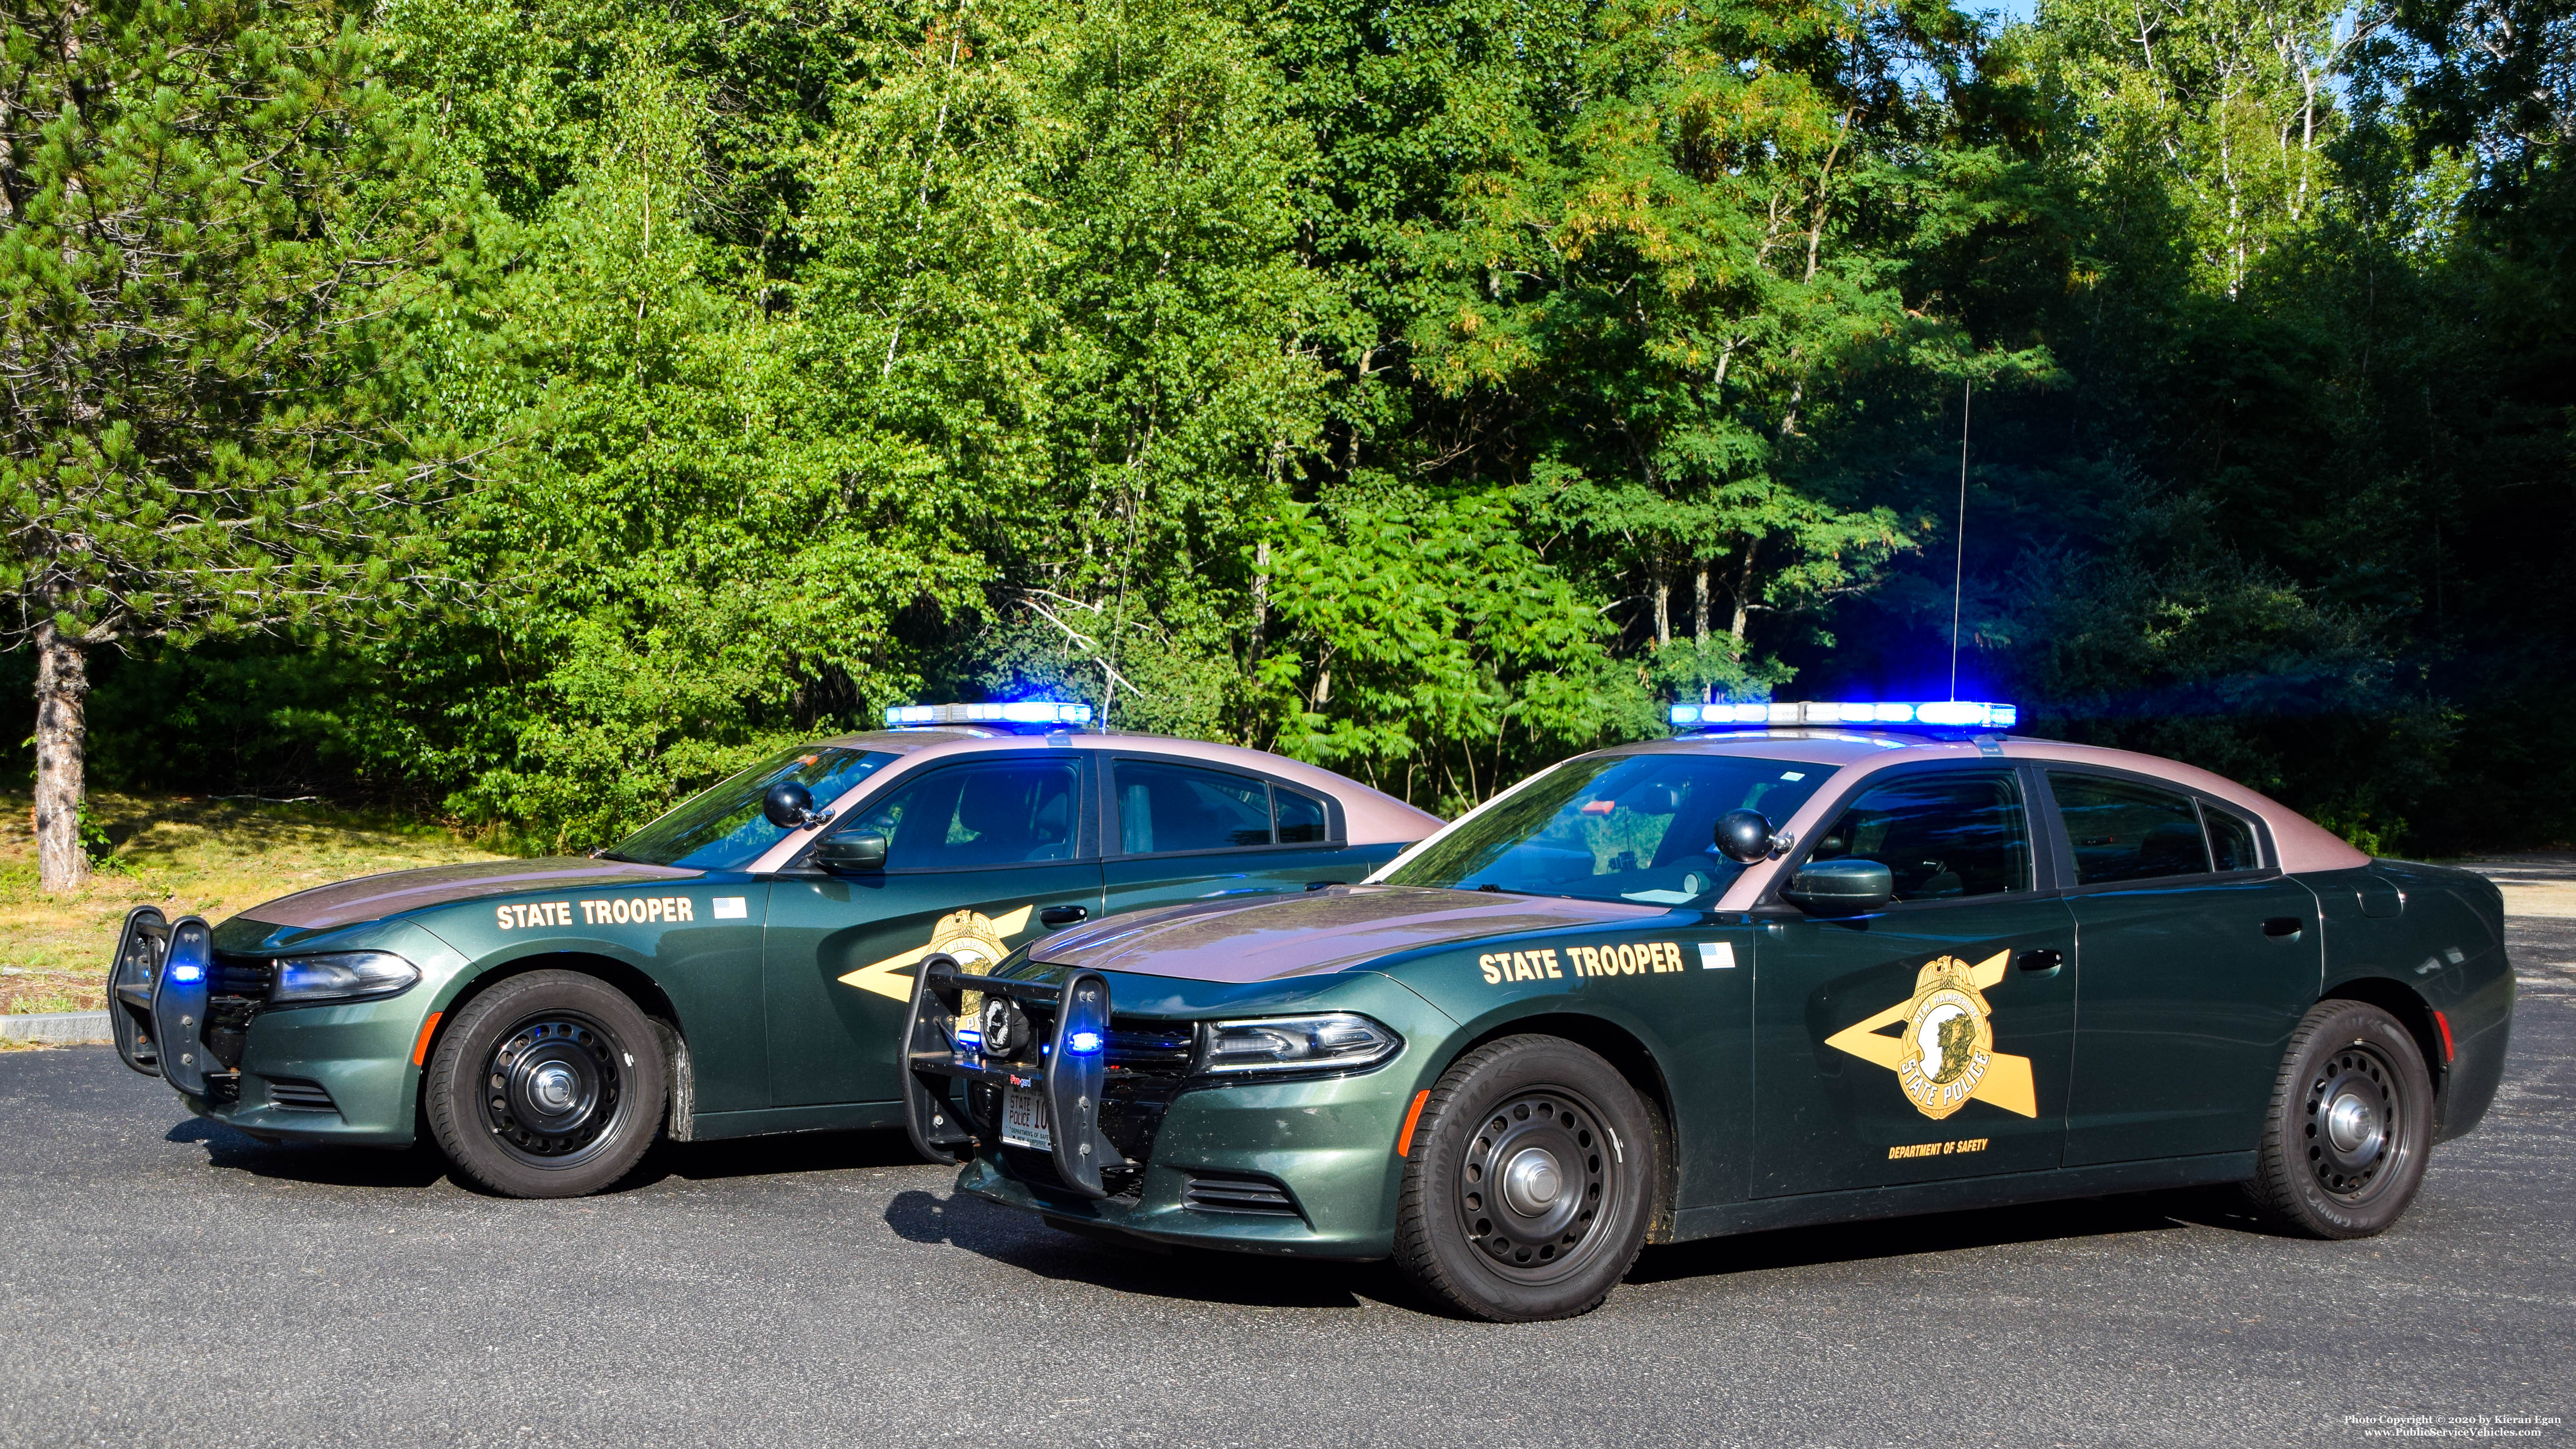 A photo  of New Hampshire State Police
            Cruiser 105, a 2016 Dodge Charger             taken by Kieran Egan